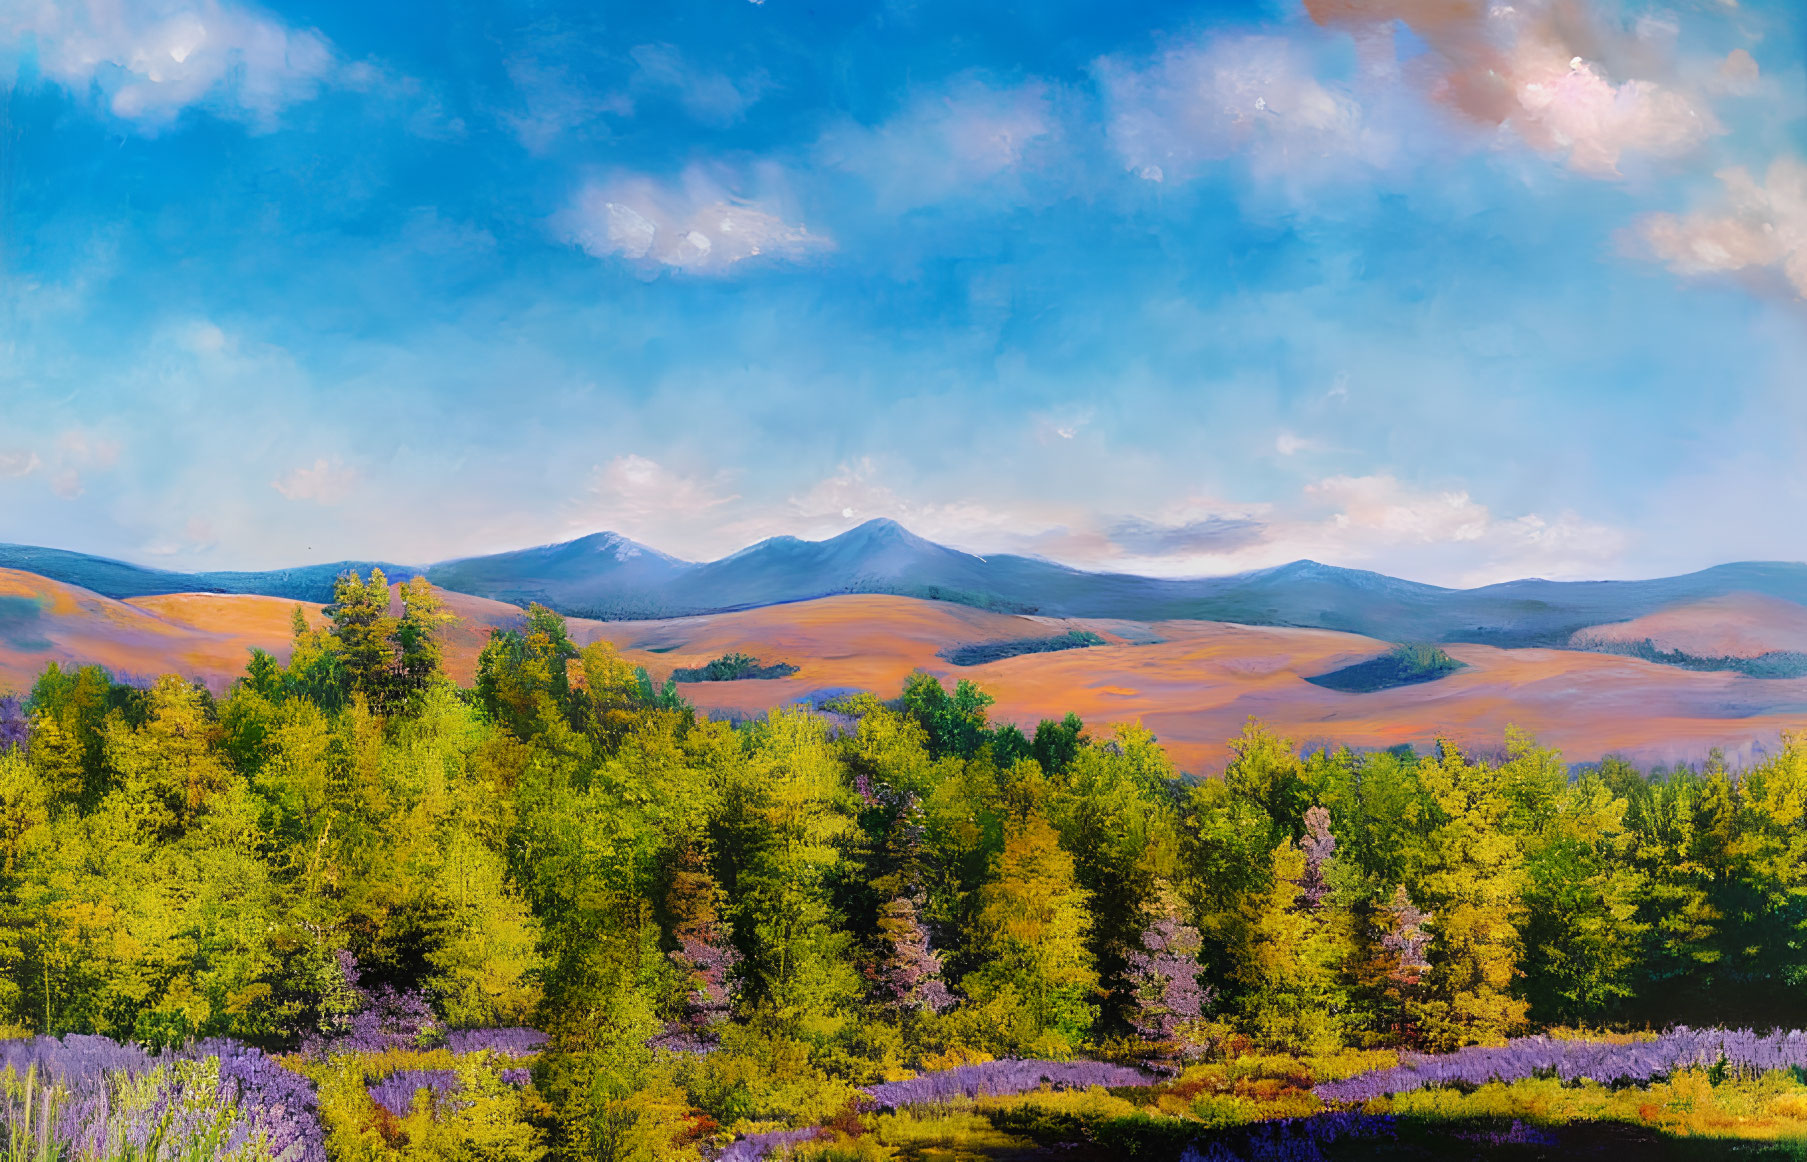 Colorful landscape painting: green forest, purple flowers, golden hills, blue mountains